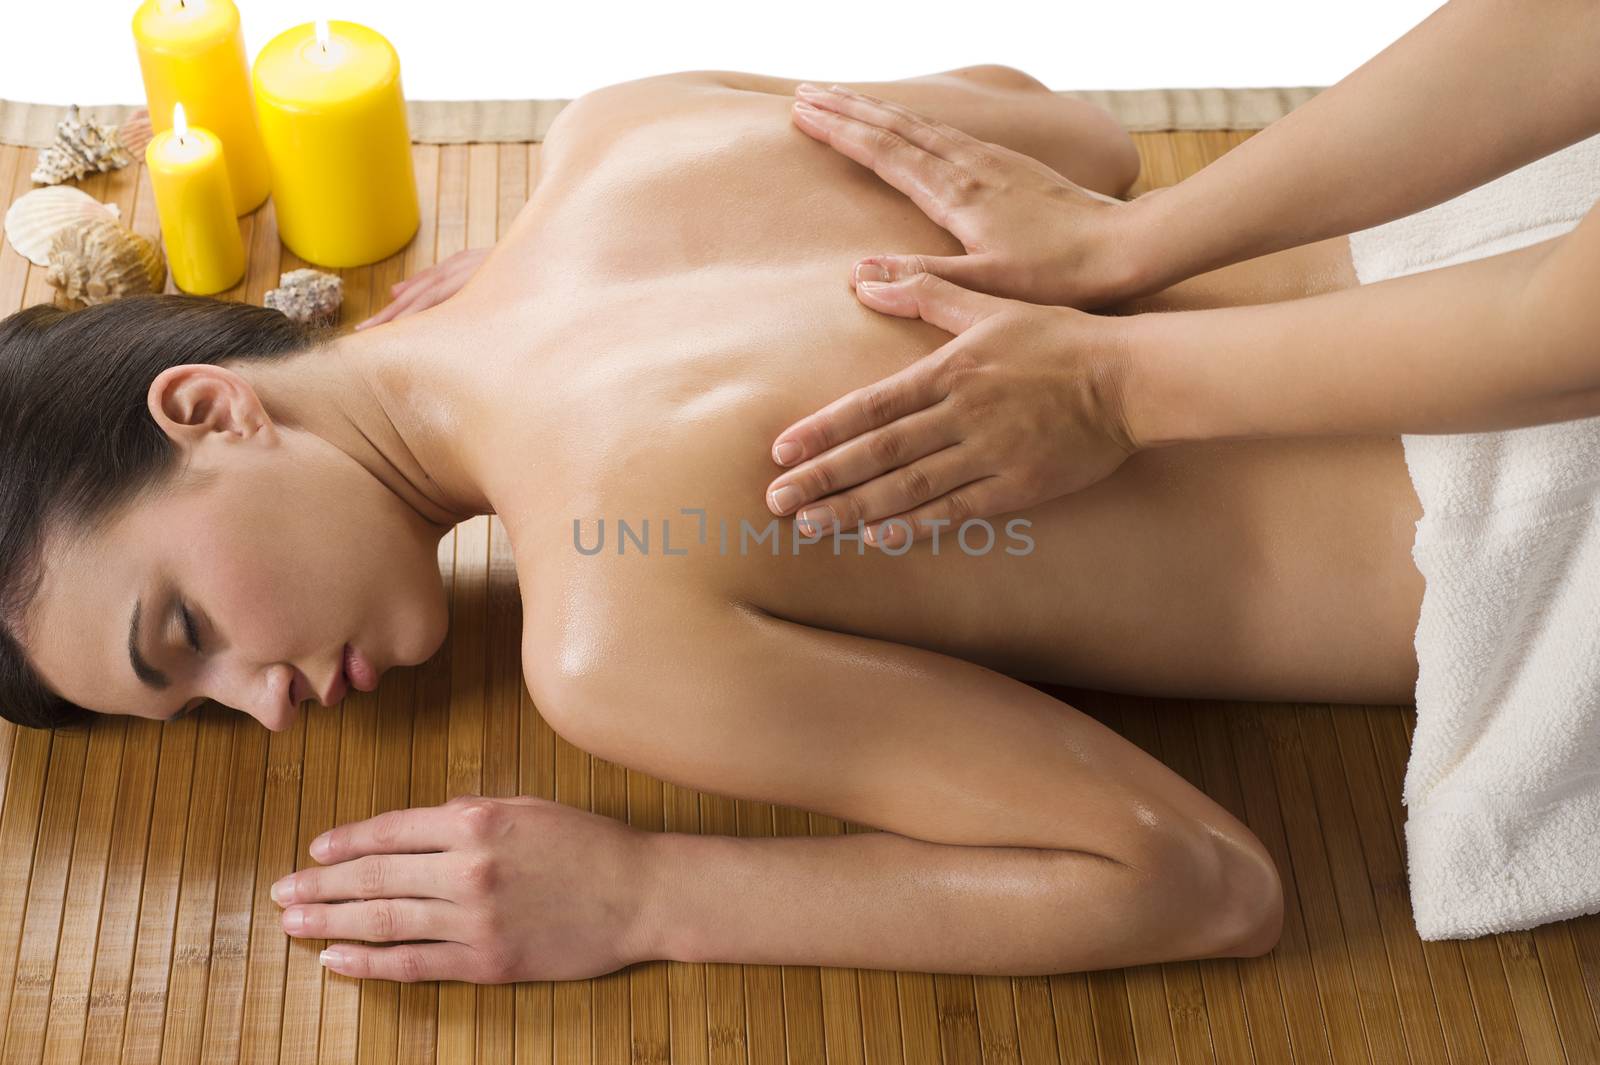 cute woman laying down on wood carpet with candle near getting an oil massage